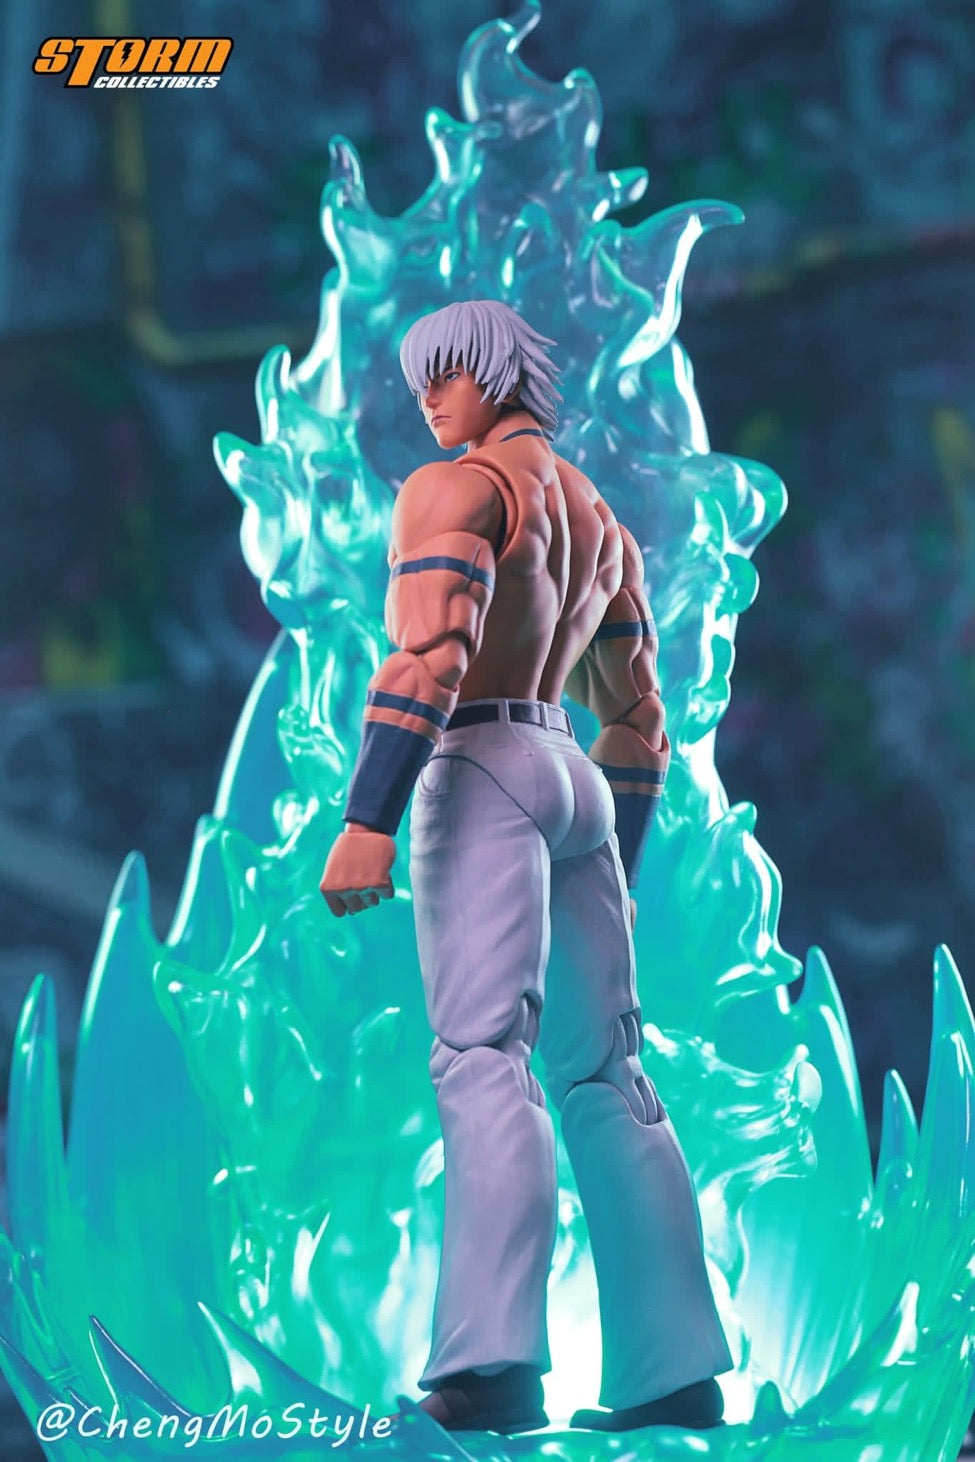 Pedido Figura Orochi - The King of Fighters 98: Ultimate Match marca Storm Collectibles escala pequeña 1/12